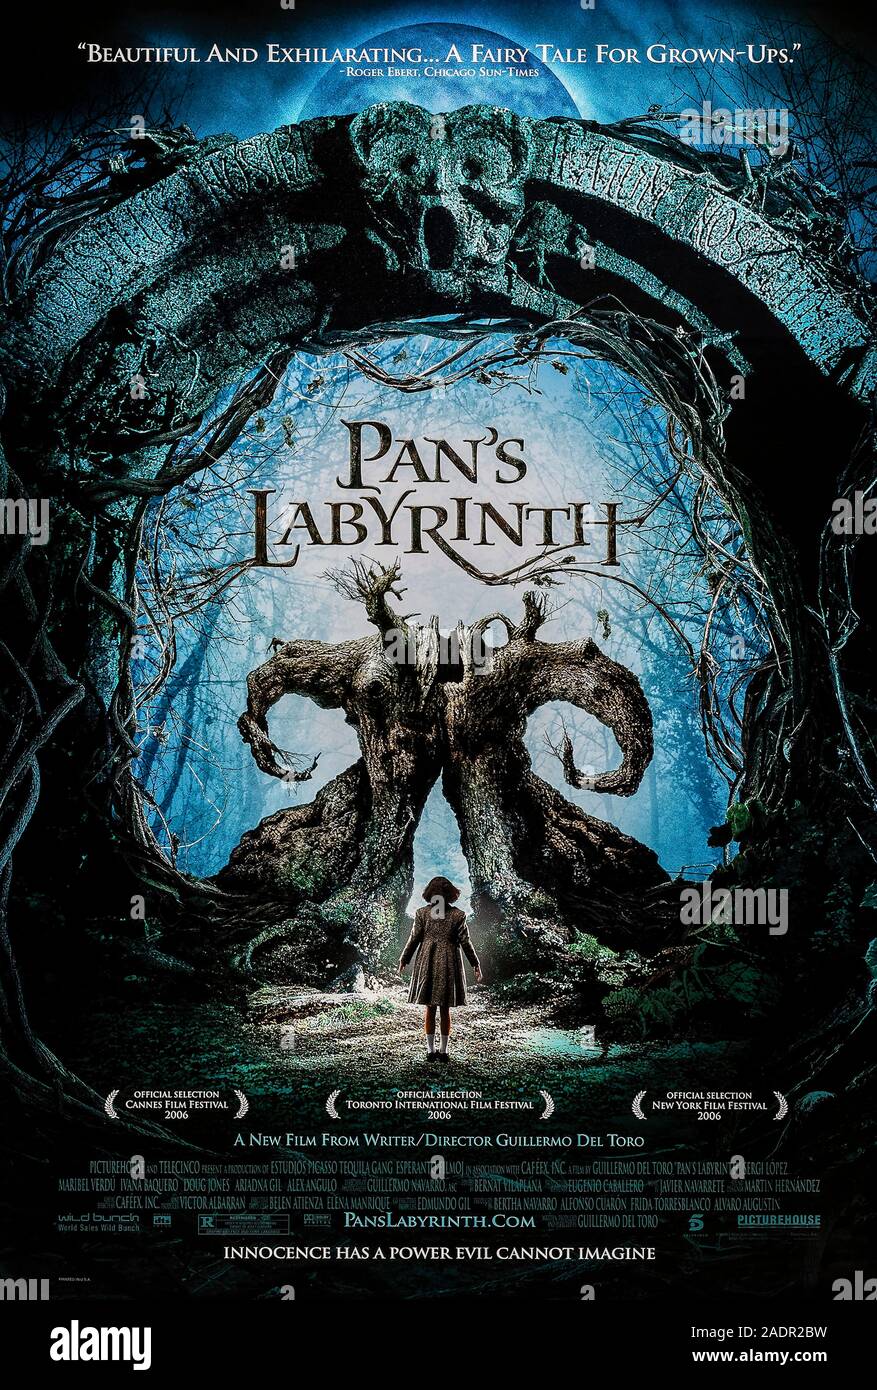 Pan's Labyrinth (2006) [El laberinto del fauno] directed and written by Guillermo del Toro and starring Ivana Baquero, Ariadna Gil, Sergi López and Maribel Verdú. A young girl living in Falangist Spain about a girl escapes the horror around her by entering in to a strange fantasy world. Stock Photo